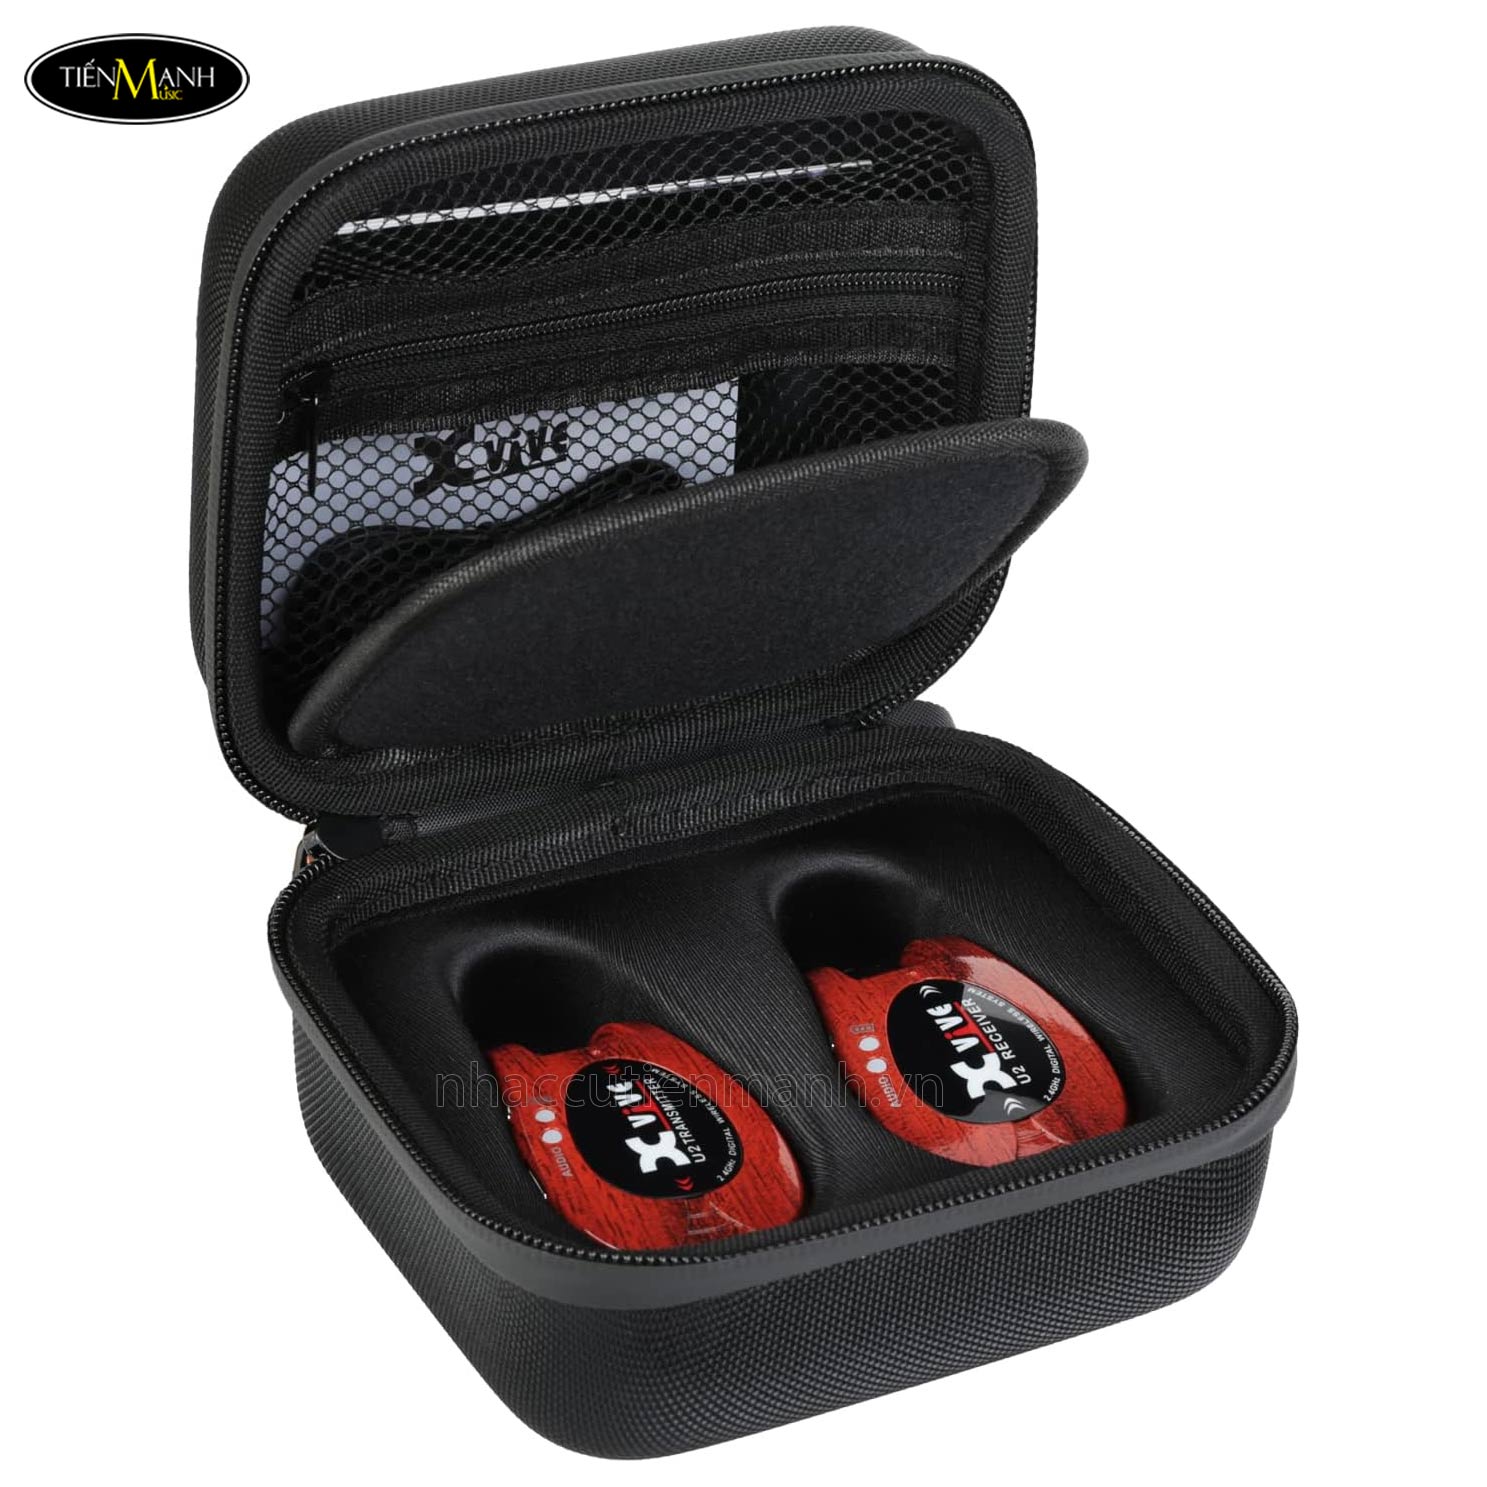 xvive-cu2-hard-case-for-the-u2-guitar-wireless-system-hop-dung-cho-xvive-cu2